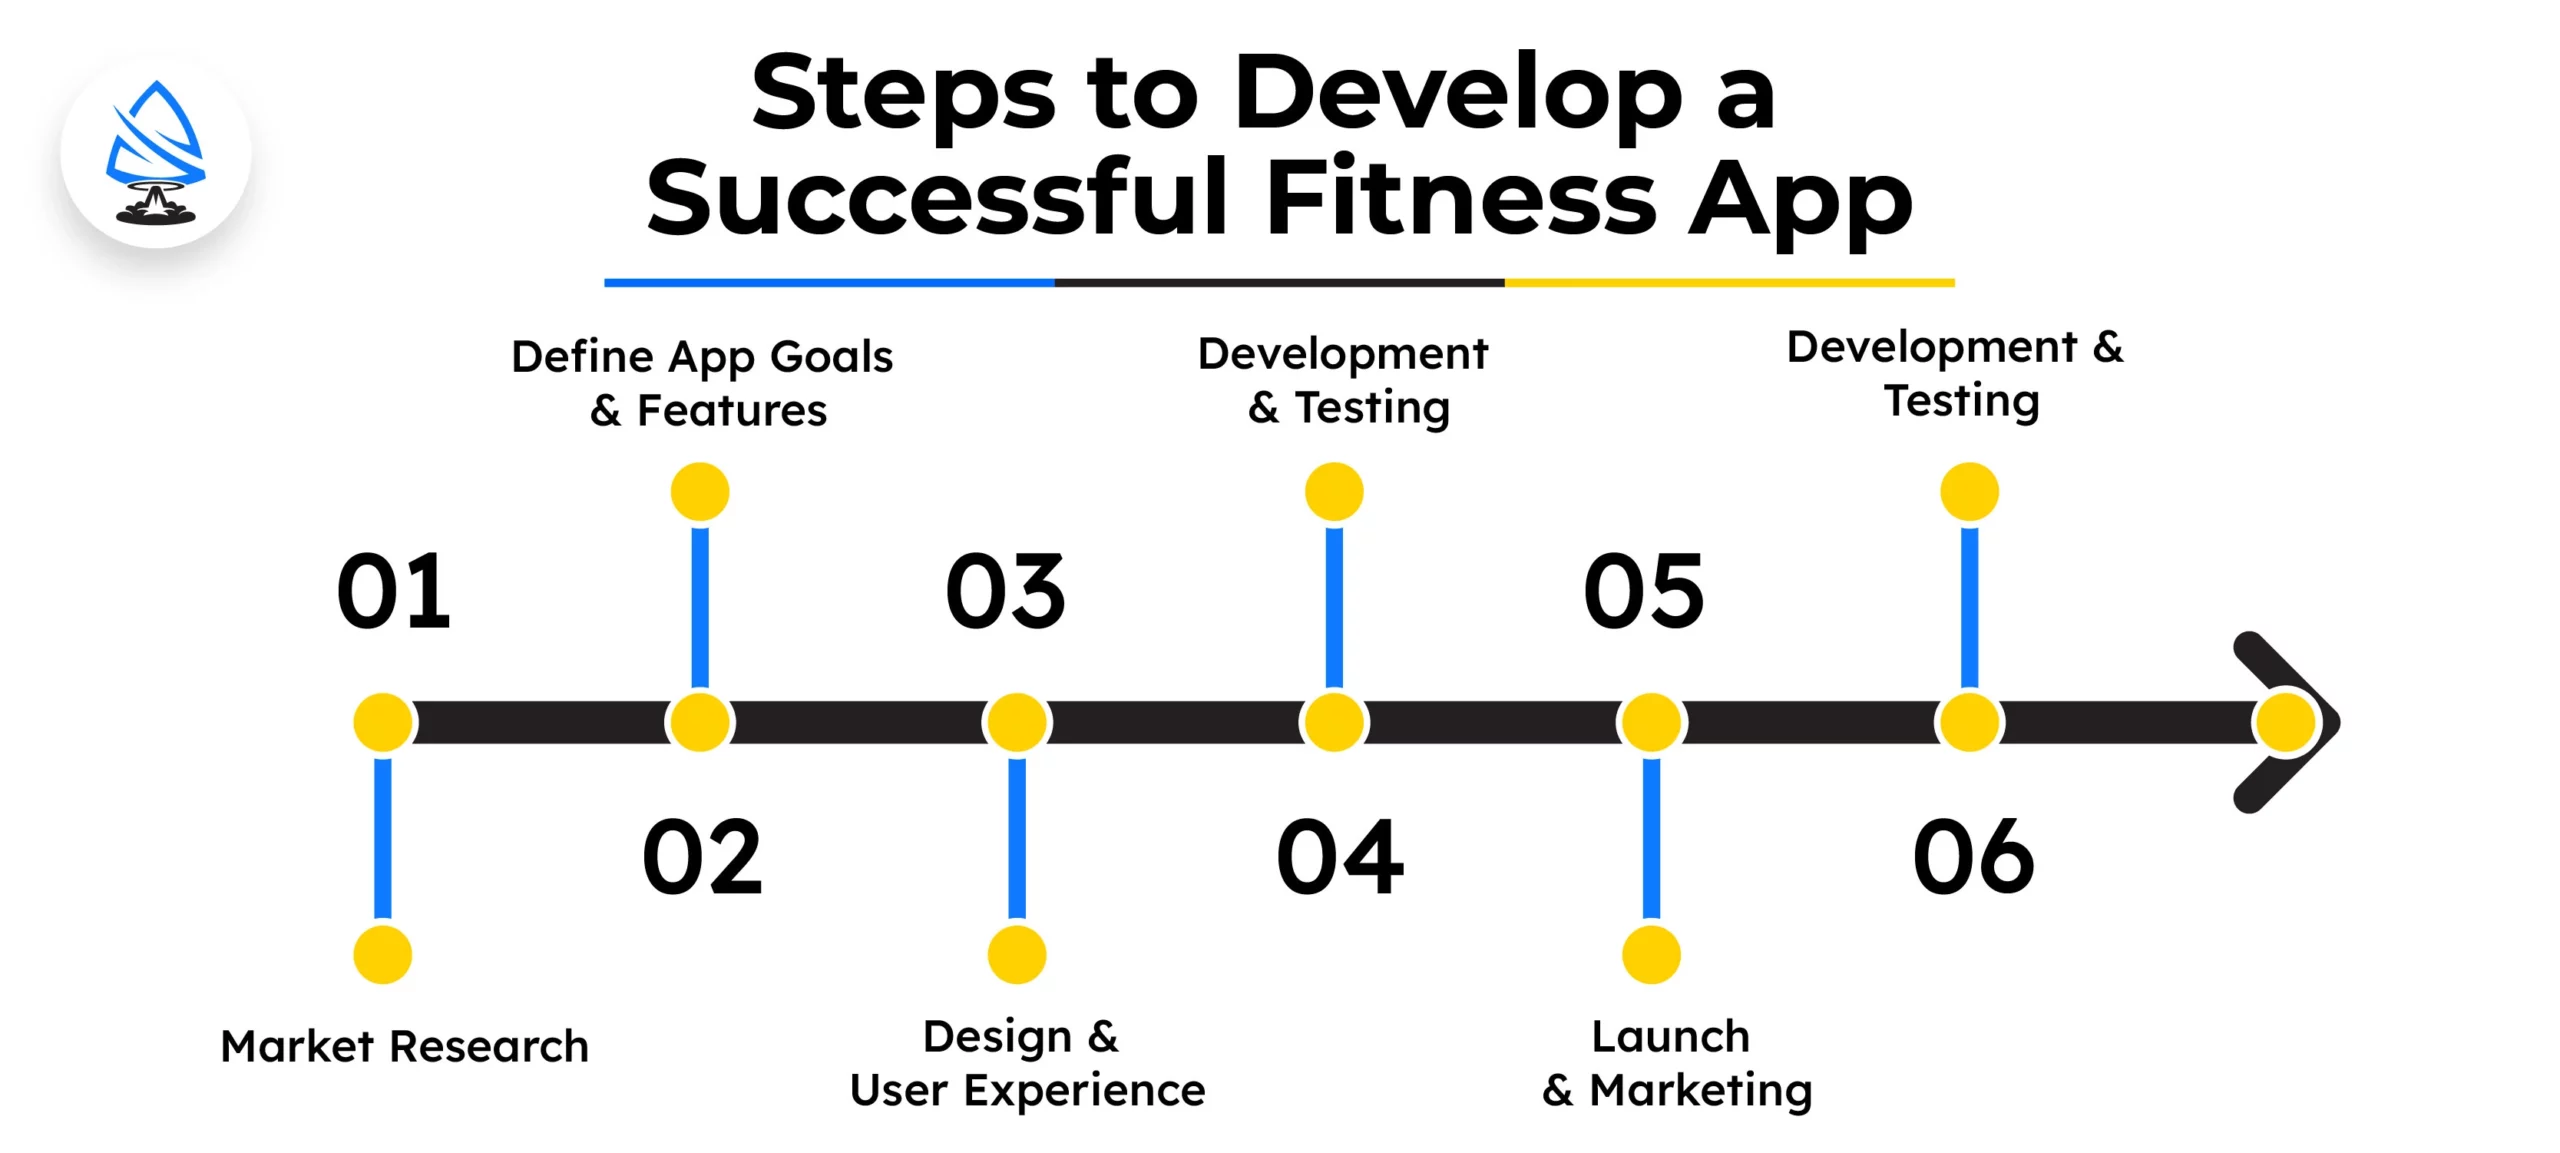 Steps to Develop a Successful Fitness App